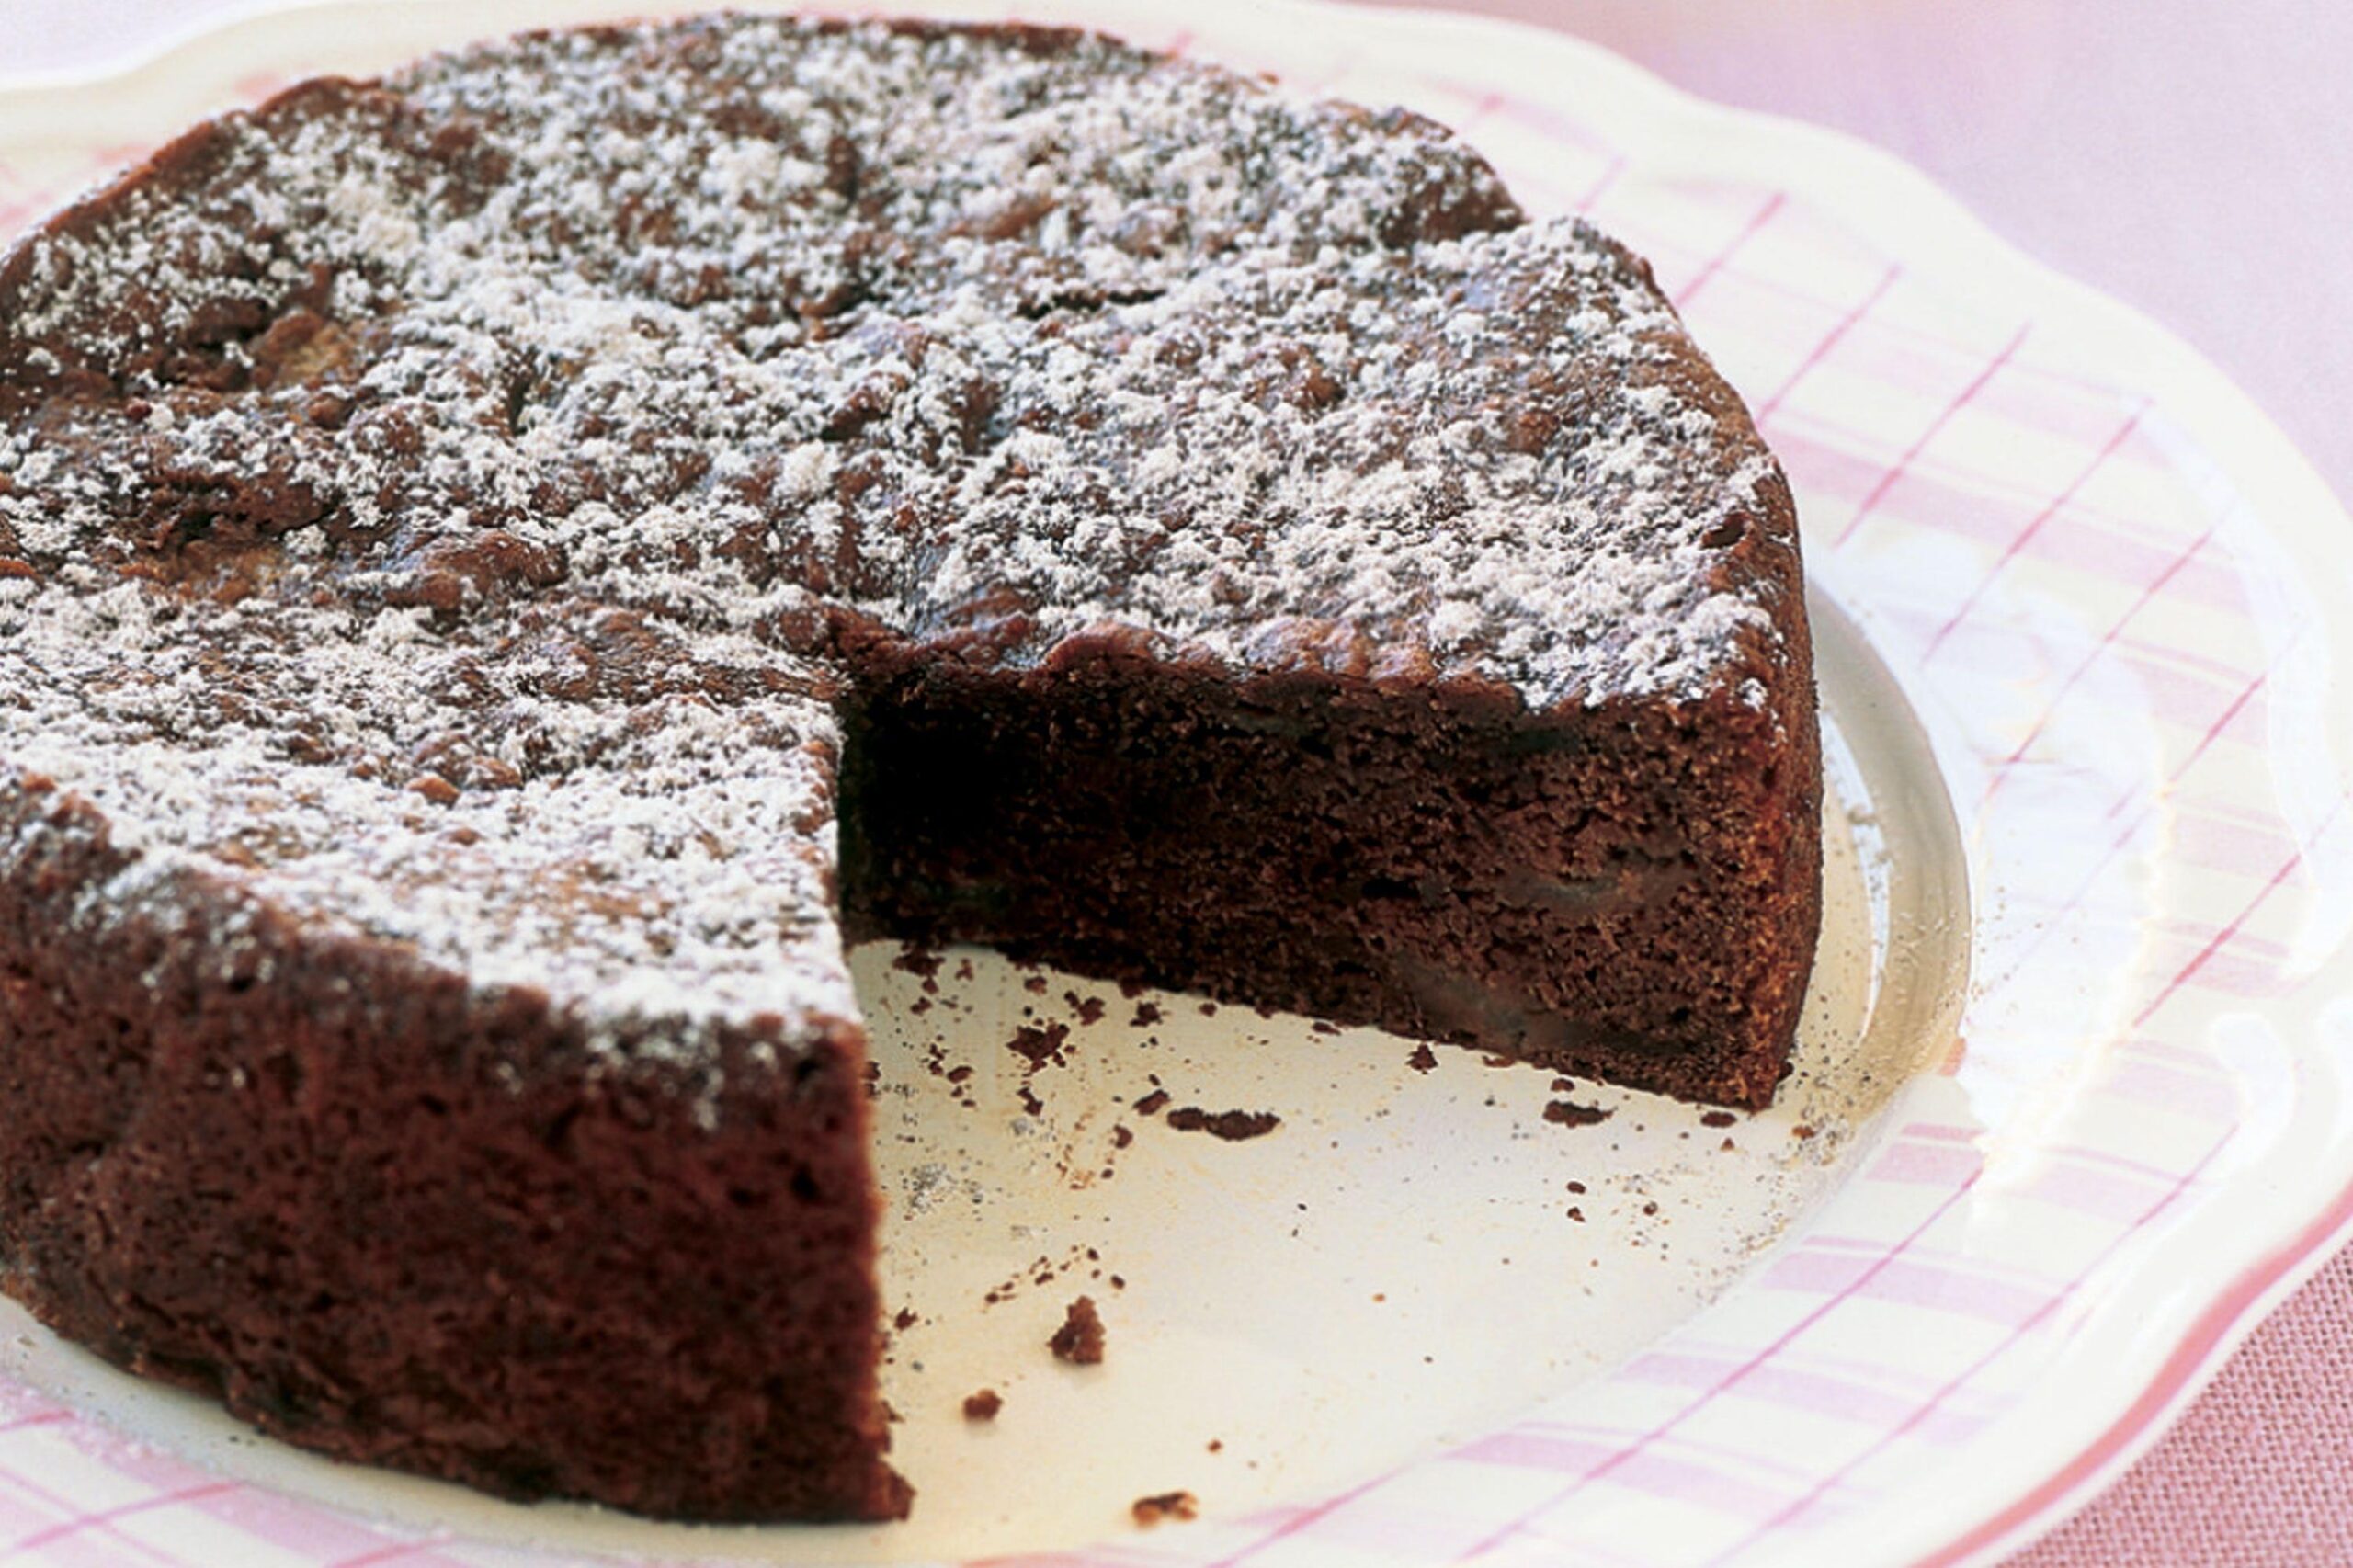  Who says gluten-free and vegan desserts can’t be delicious?